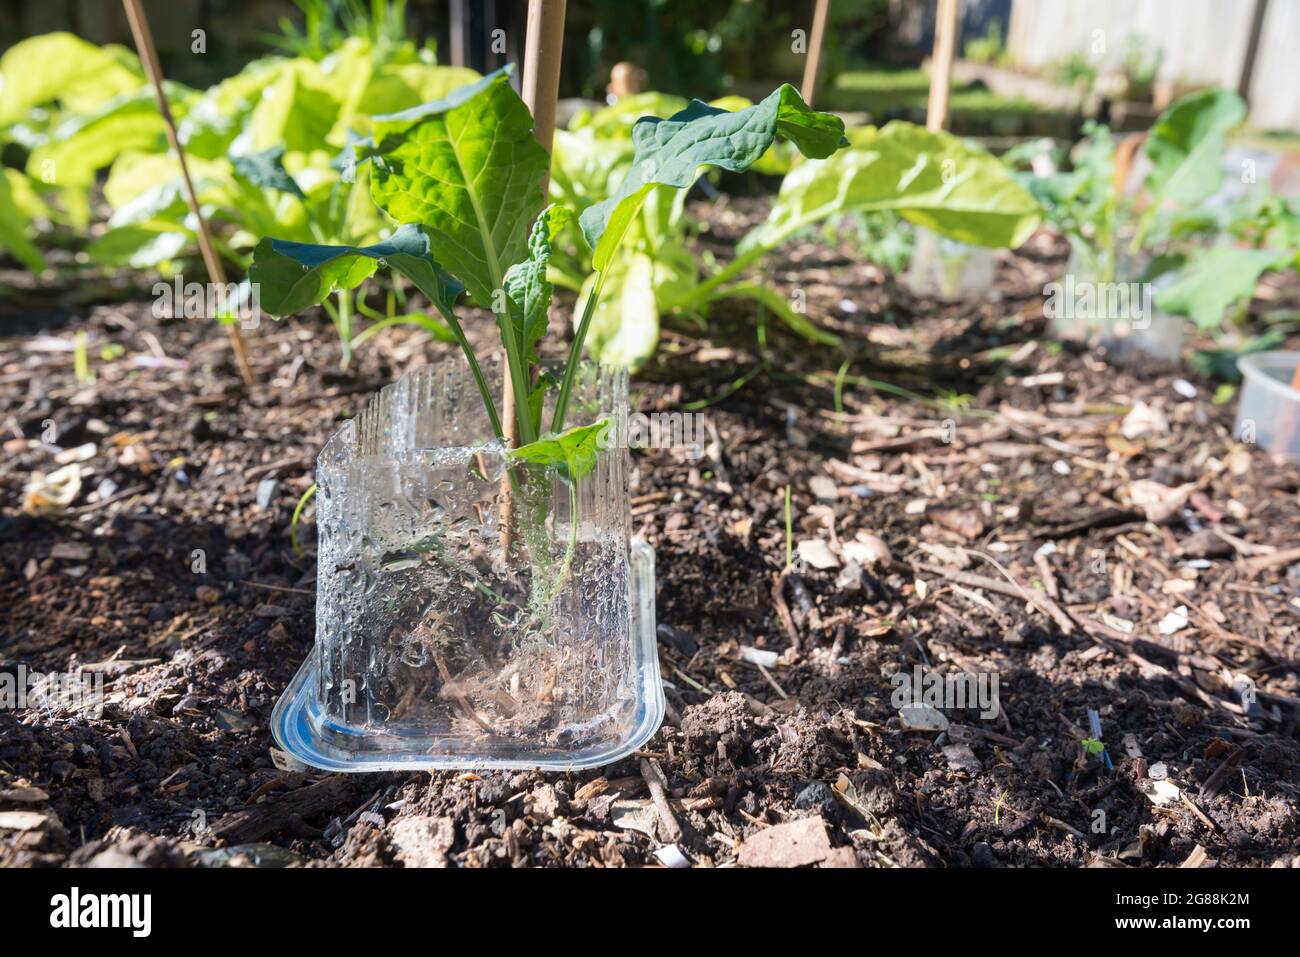 Young Kale plants growing in a vegetable garden in Sydney, Australia, protected from snails and slugs with cut down plastic bottles and containers Stock Photo